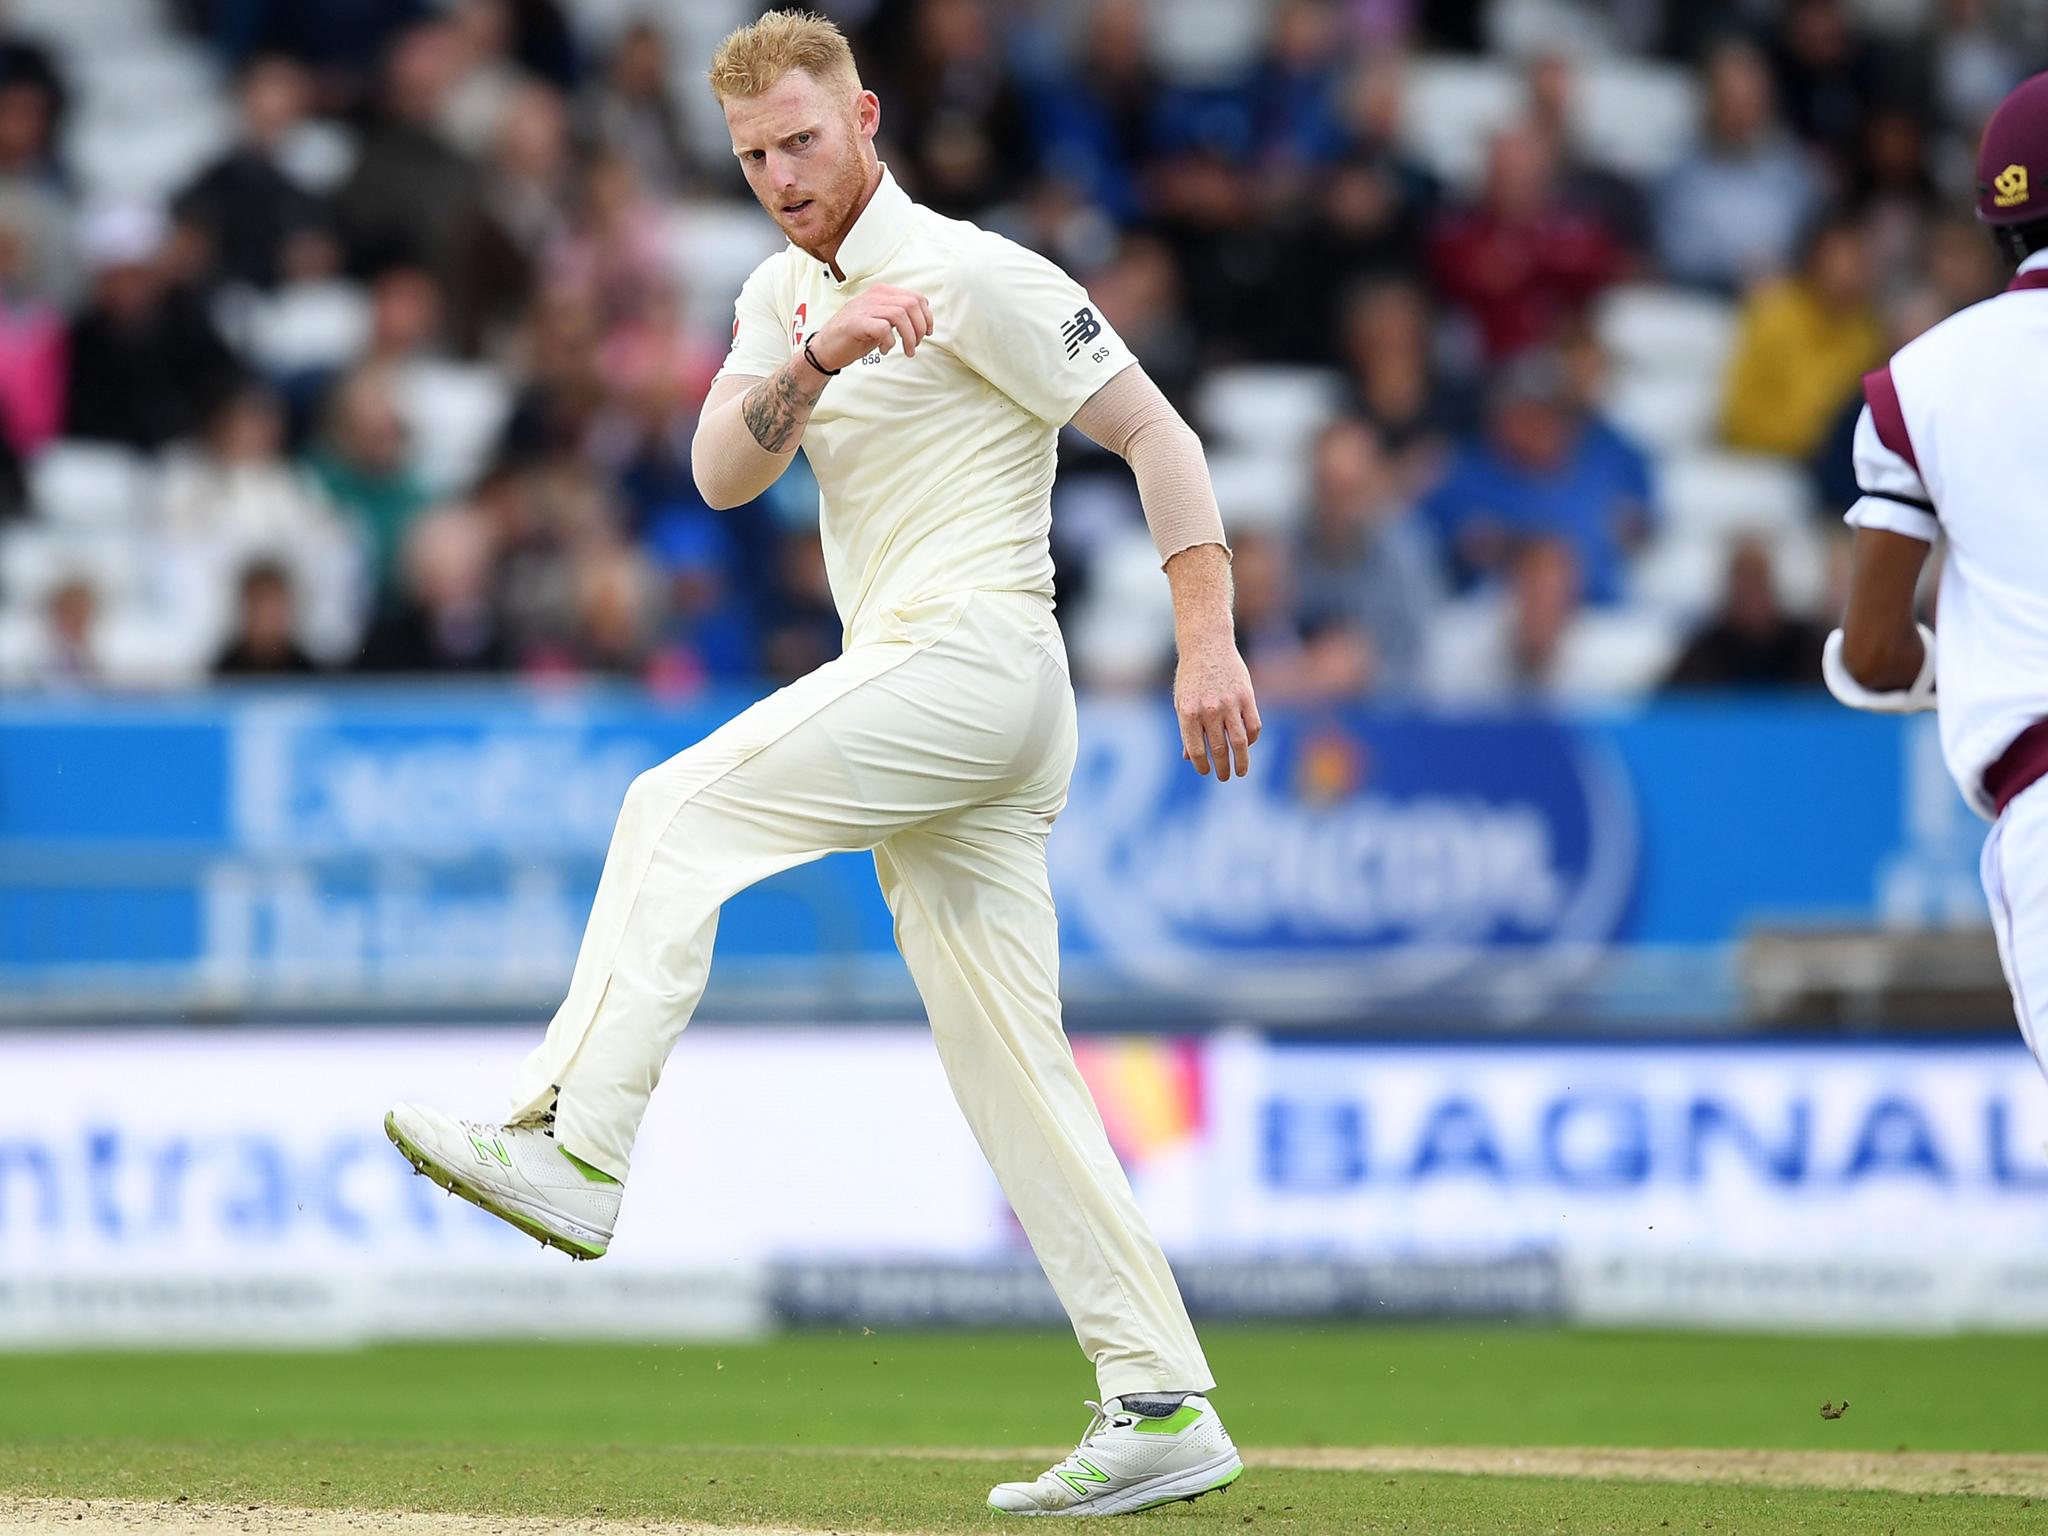 It is now likely Stokes will miss the Ashes